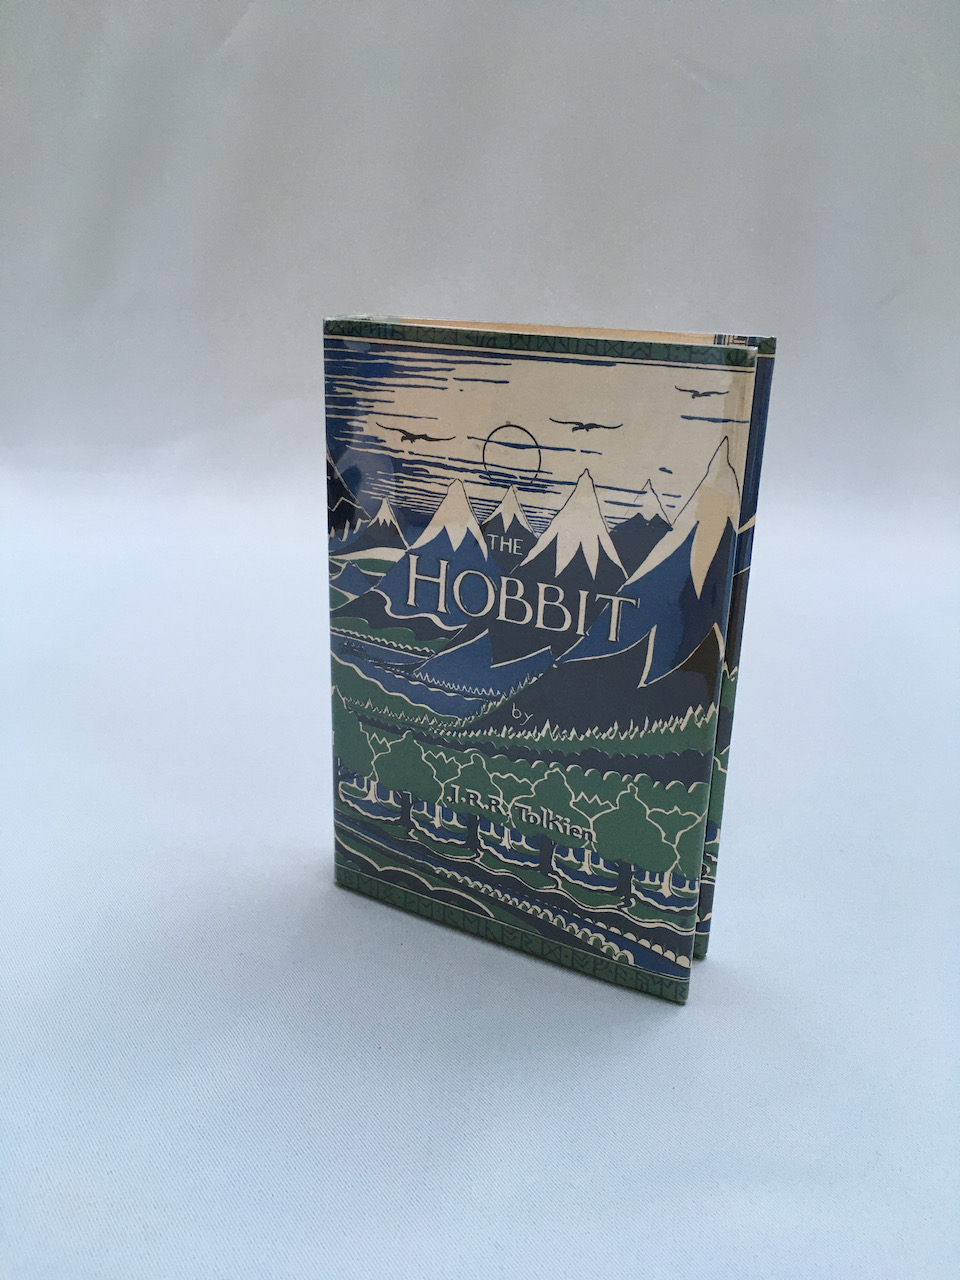 The Hobbit, or There and Back Again, by J.R.R. Tolkien. Published by Allen & Unwin in 1957